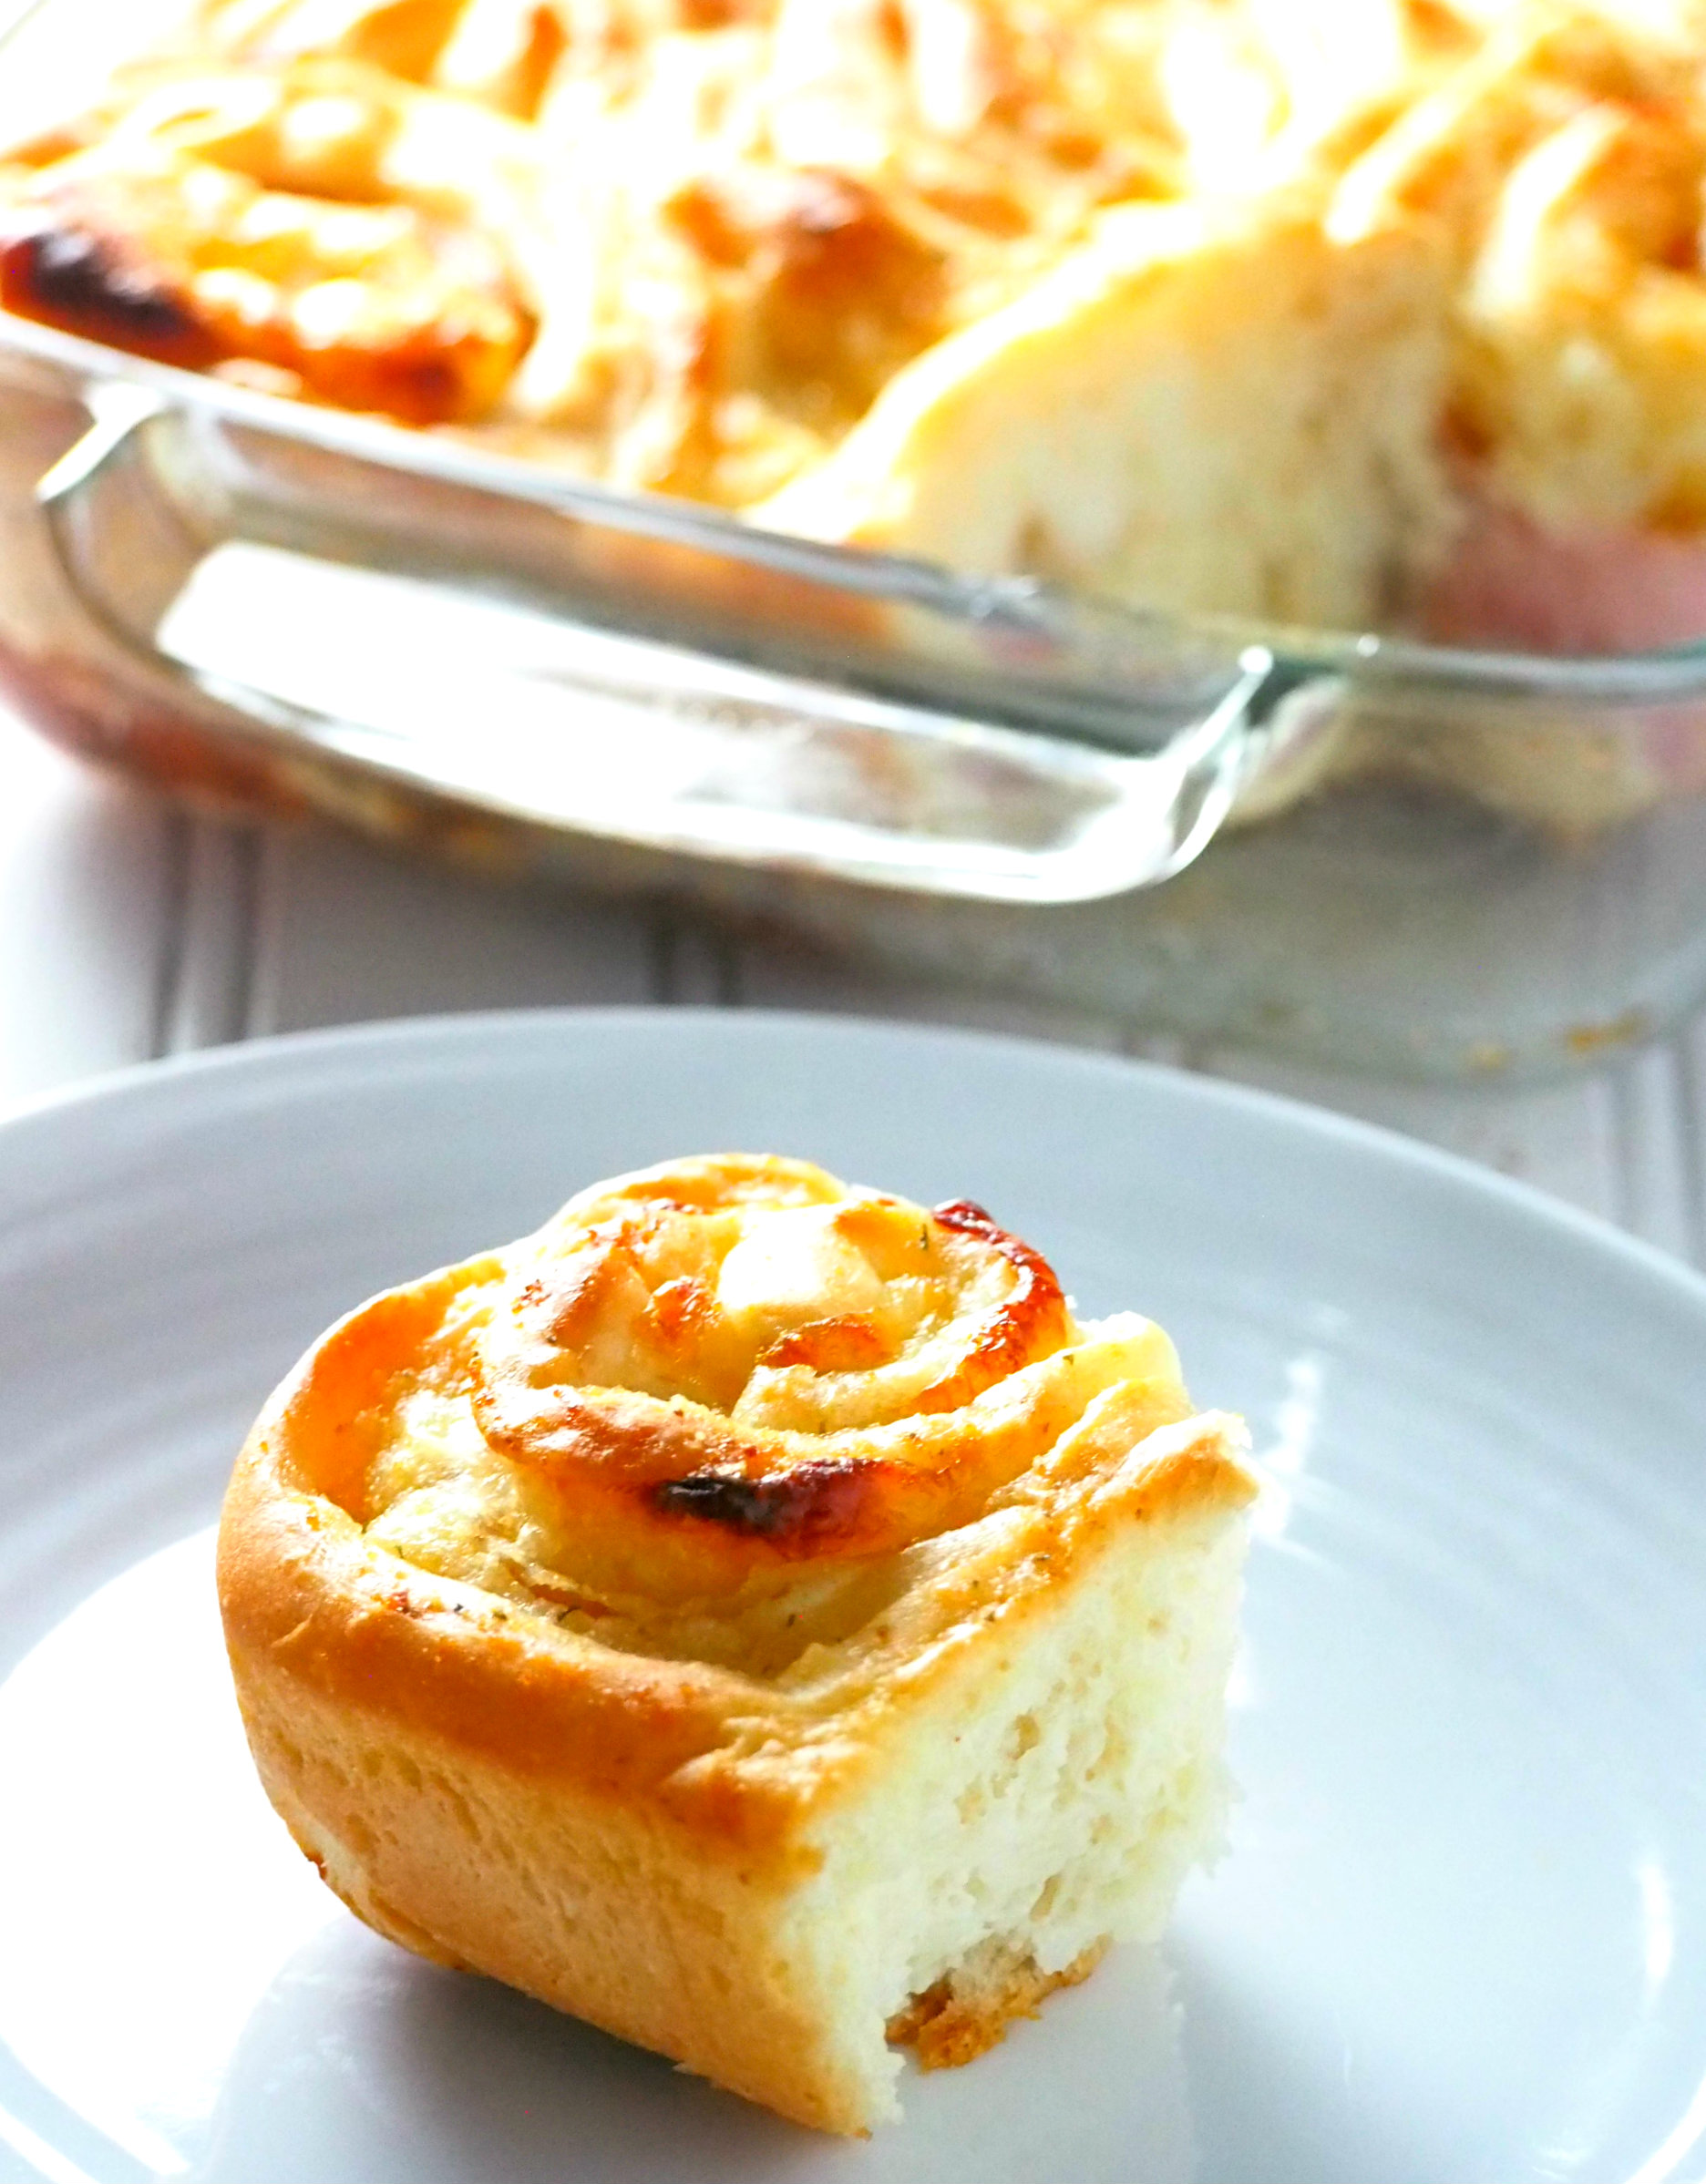 Flavorful, soft and garlicky ham and cheese rolls to fill you up at breakfast, lunch or snack time.